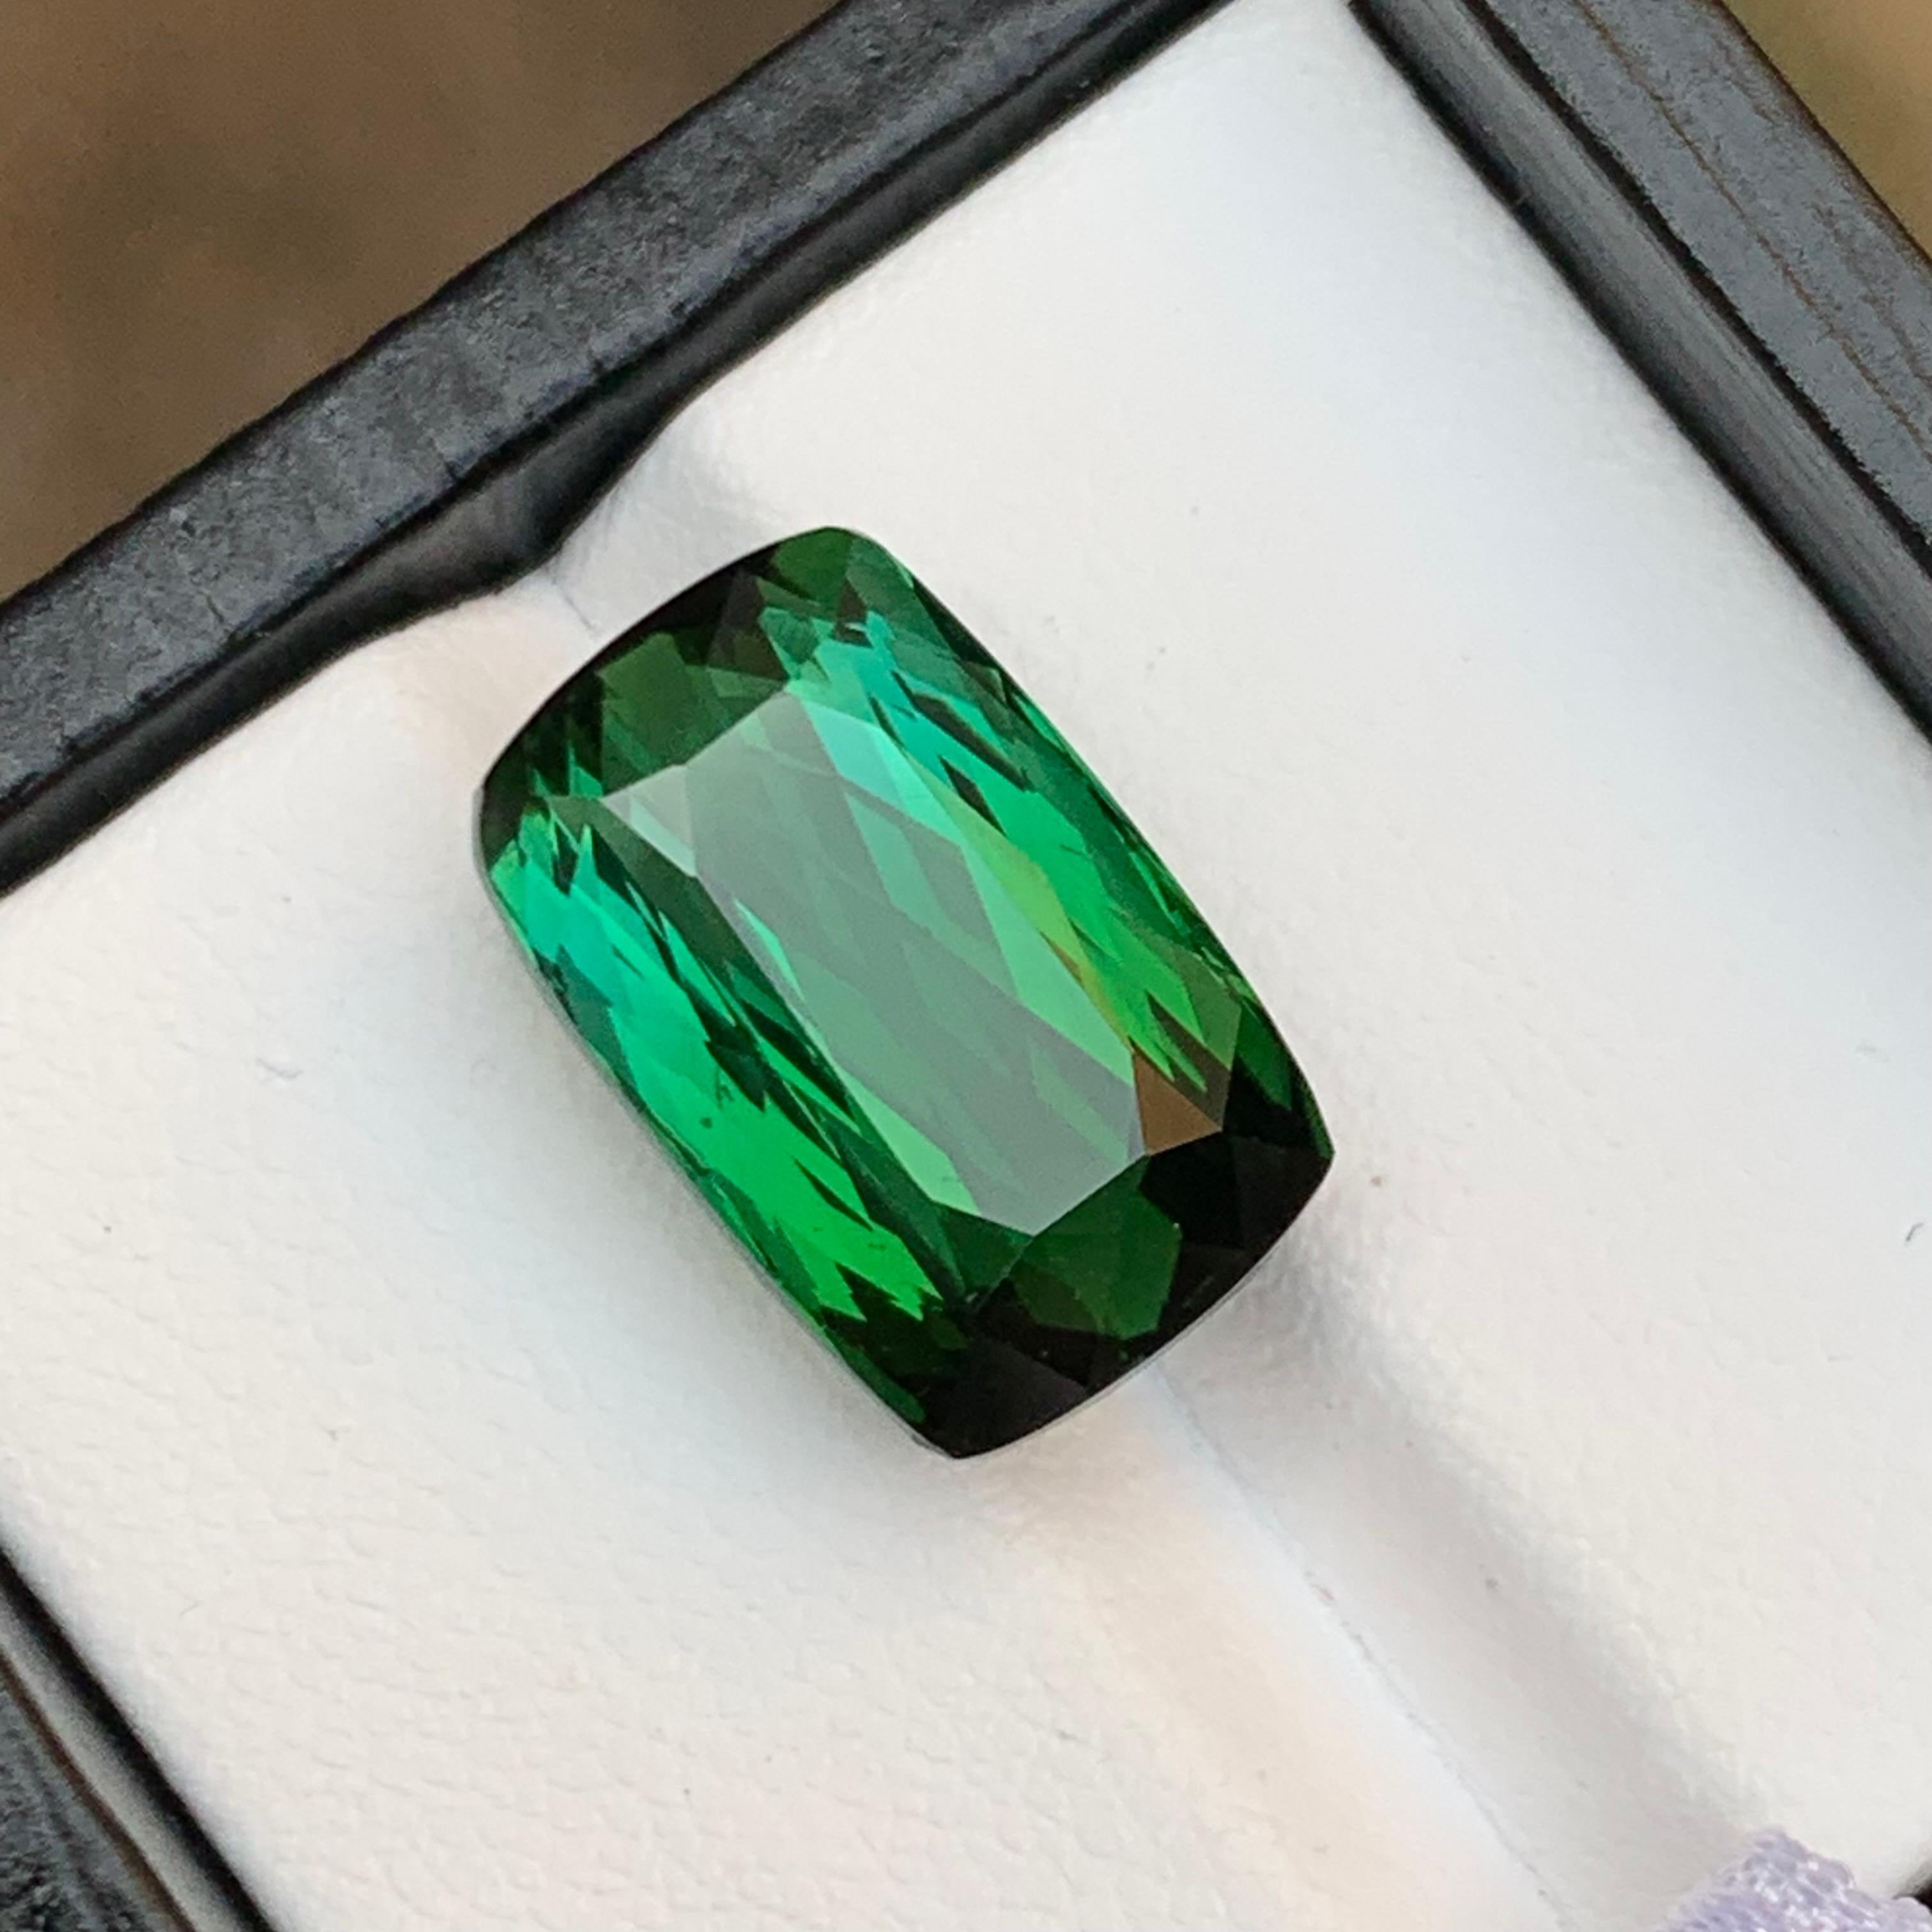 Gemstone Type: Tourmaline
Weight: 12.65 Carats
Dimensions: 15.53 x 9.98 x 8.86 mm
Color: Neon Green Bicolor
Clarity: 98% Eye Clean
Treatment: Untreated 
Origin: Afghanistan
Certificate: On demand 

This stunning fancy Cushion cut Neon Green Bicolor